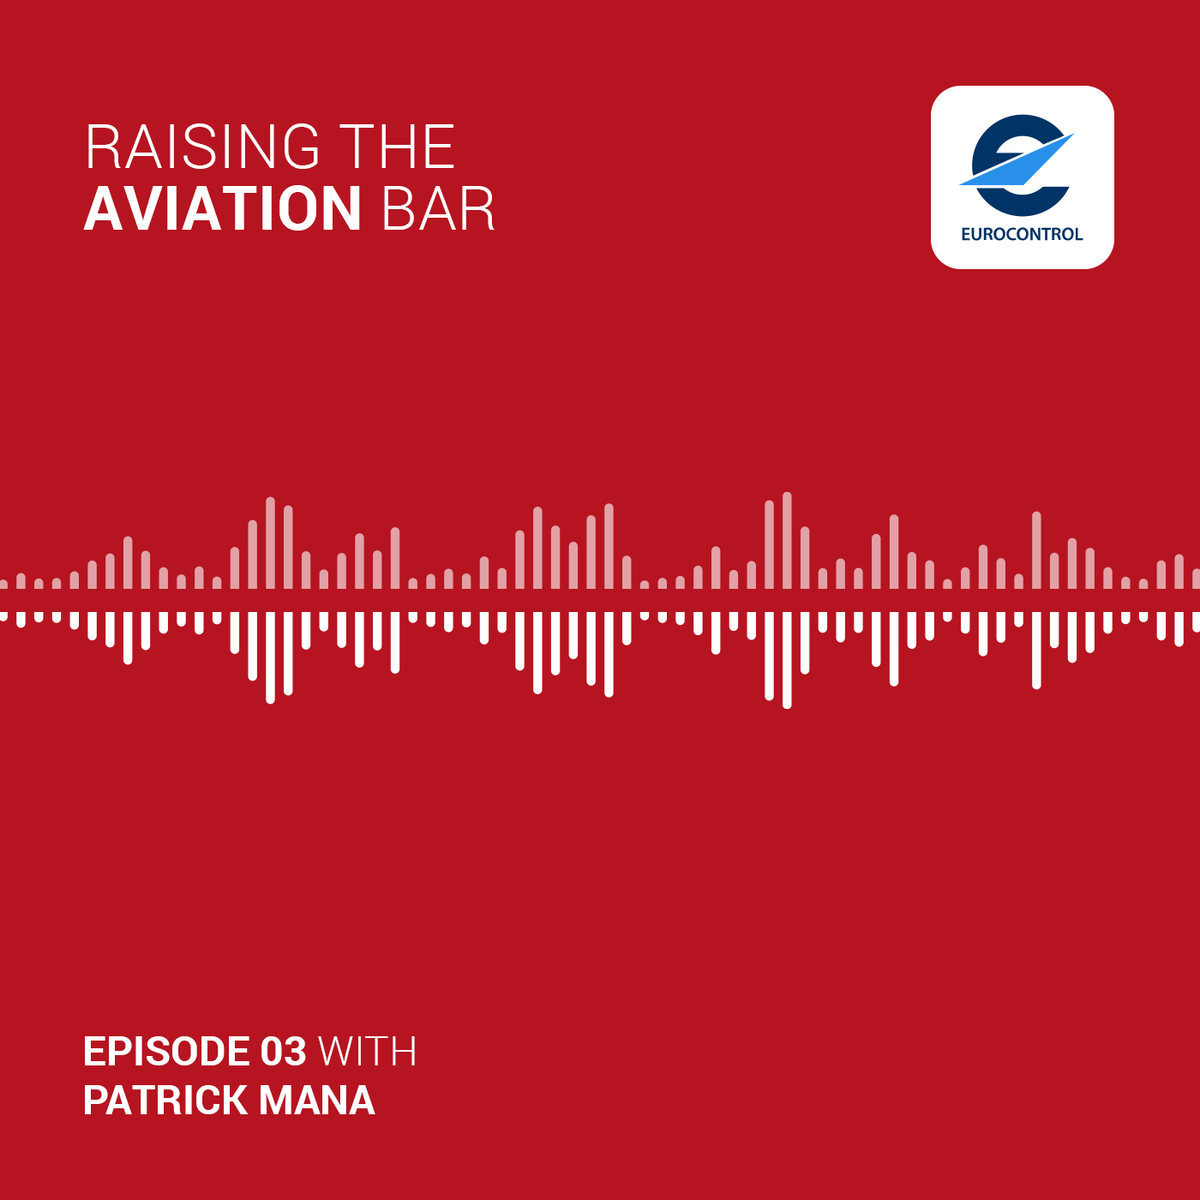 Listen to our Raising the Aviation Bar podcast with Patrick MANA on: 🔒the most common aviation cyber threats 🔒the most critical security controls that organisations may need 🔒the challenge/opportunity of #AI & #machinelearning for cybersecurity …trolraisingtheaviationbar.podbean.com/e/episode3/